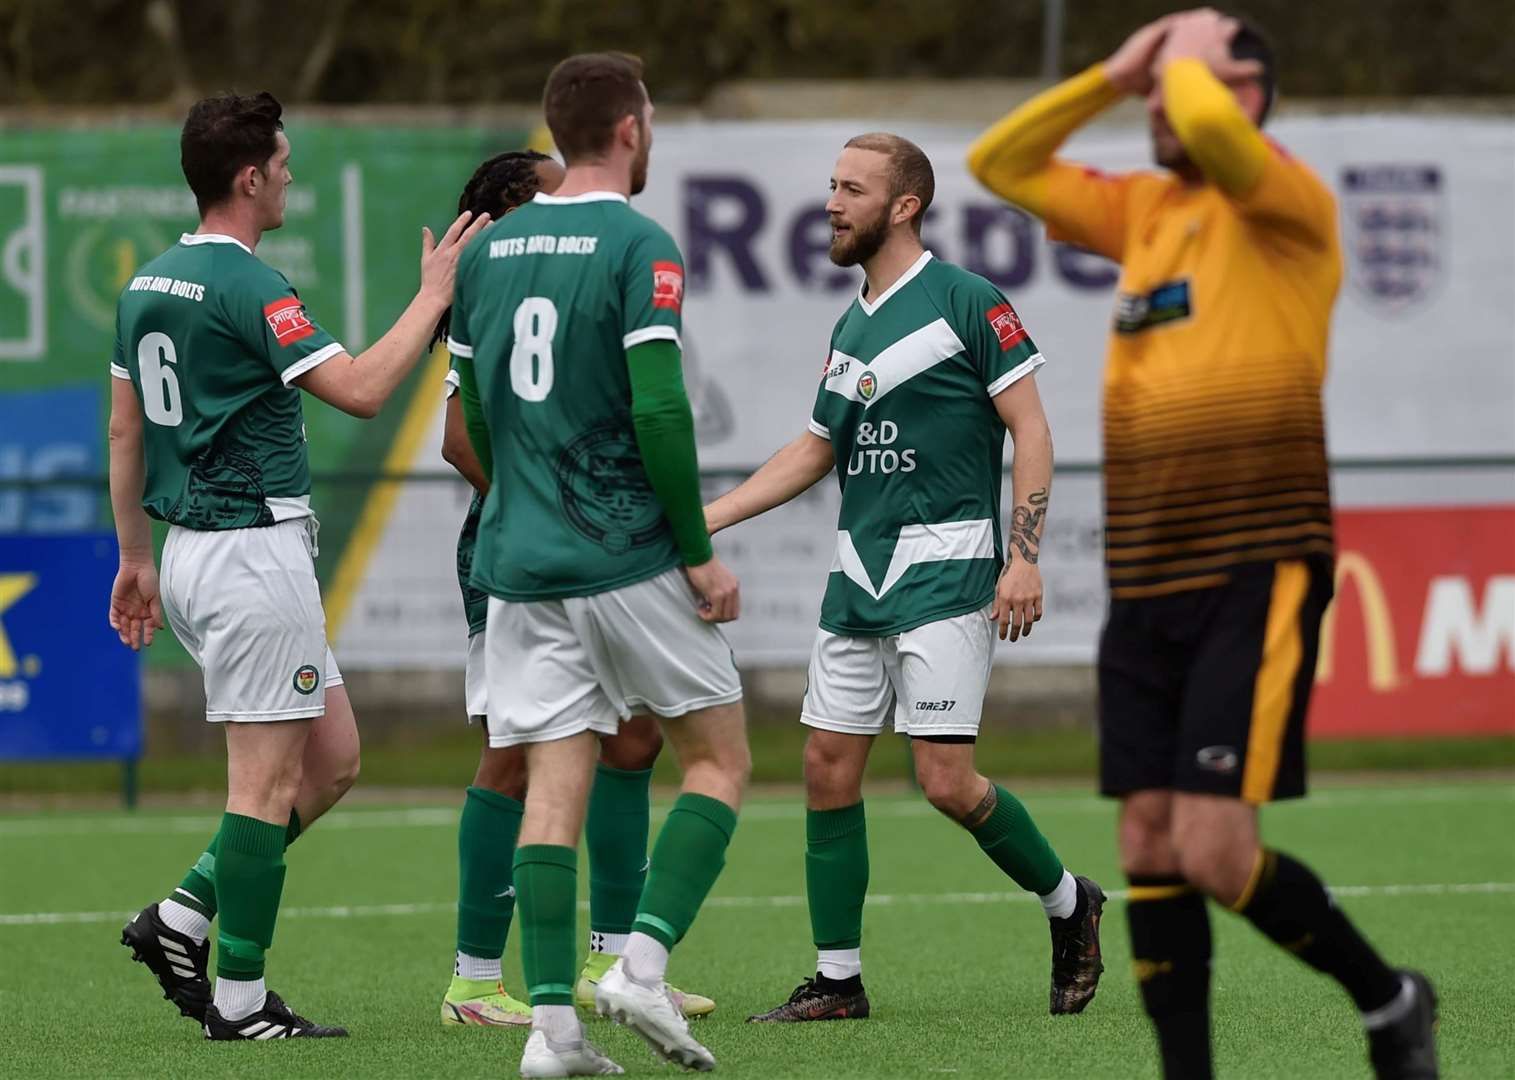 Ashford celebrate Robbie Rees’ goal in the first half. Picture: Ian Scammell